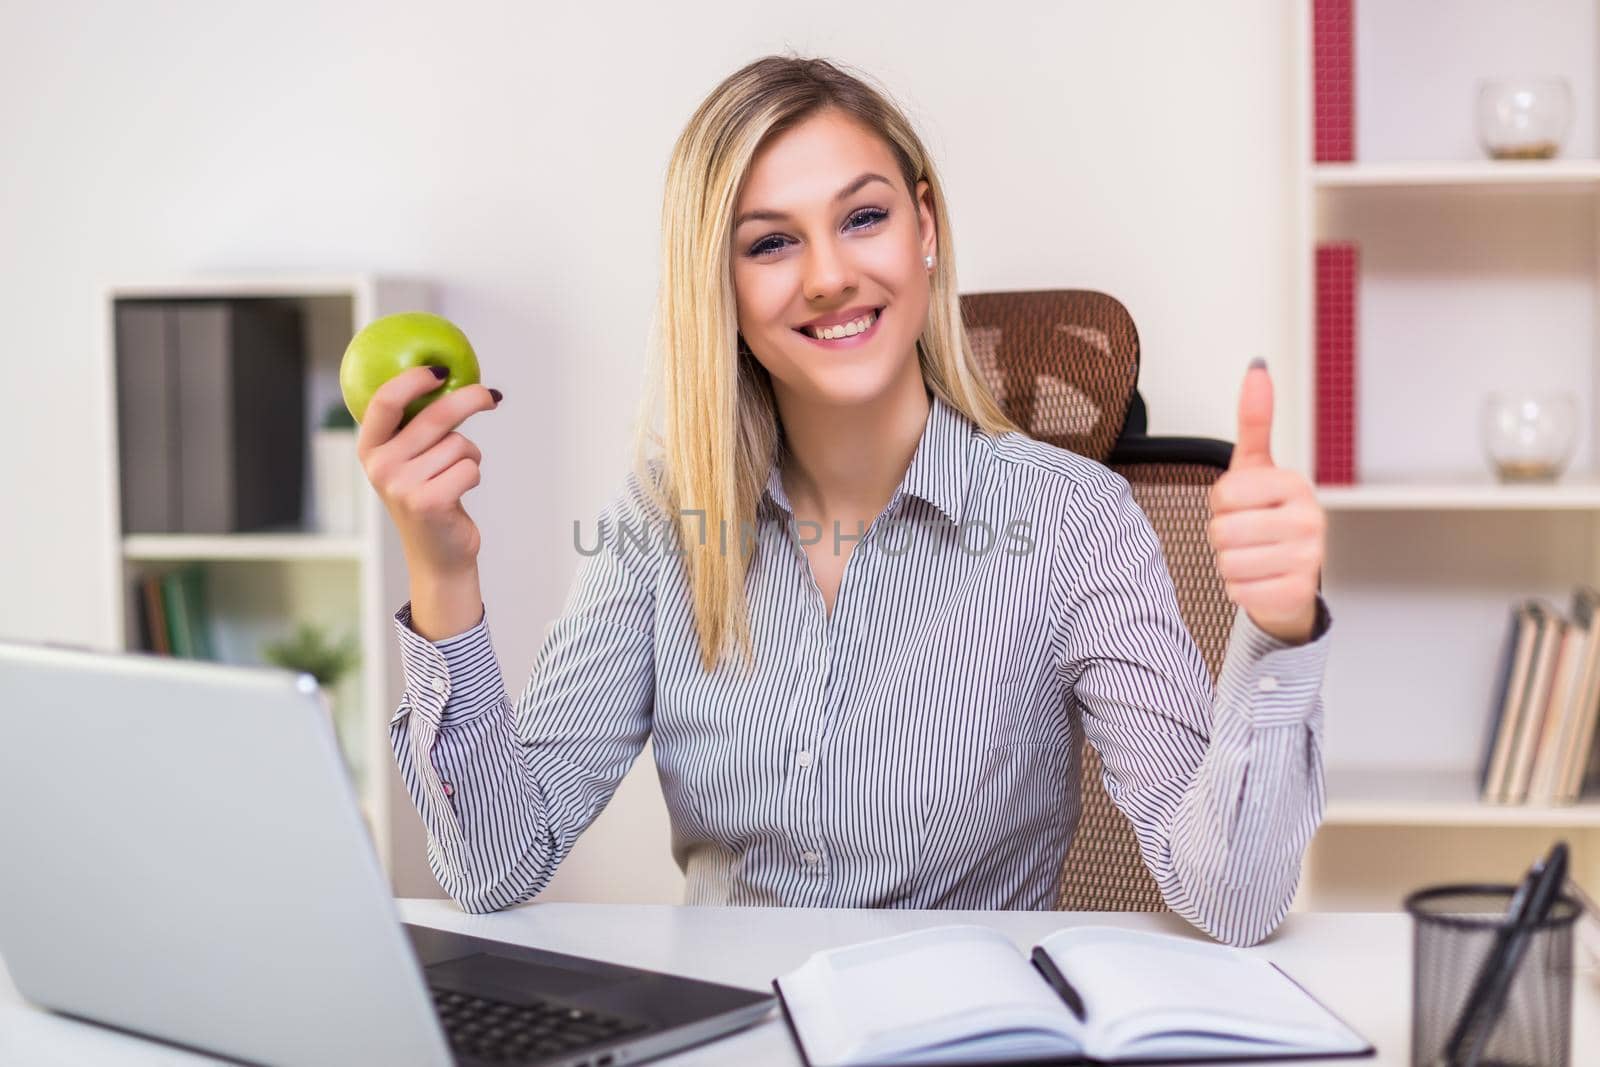 Businesswoman eating apple and showing thumb up while working in her office.